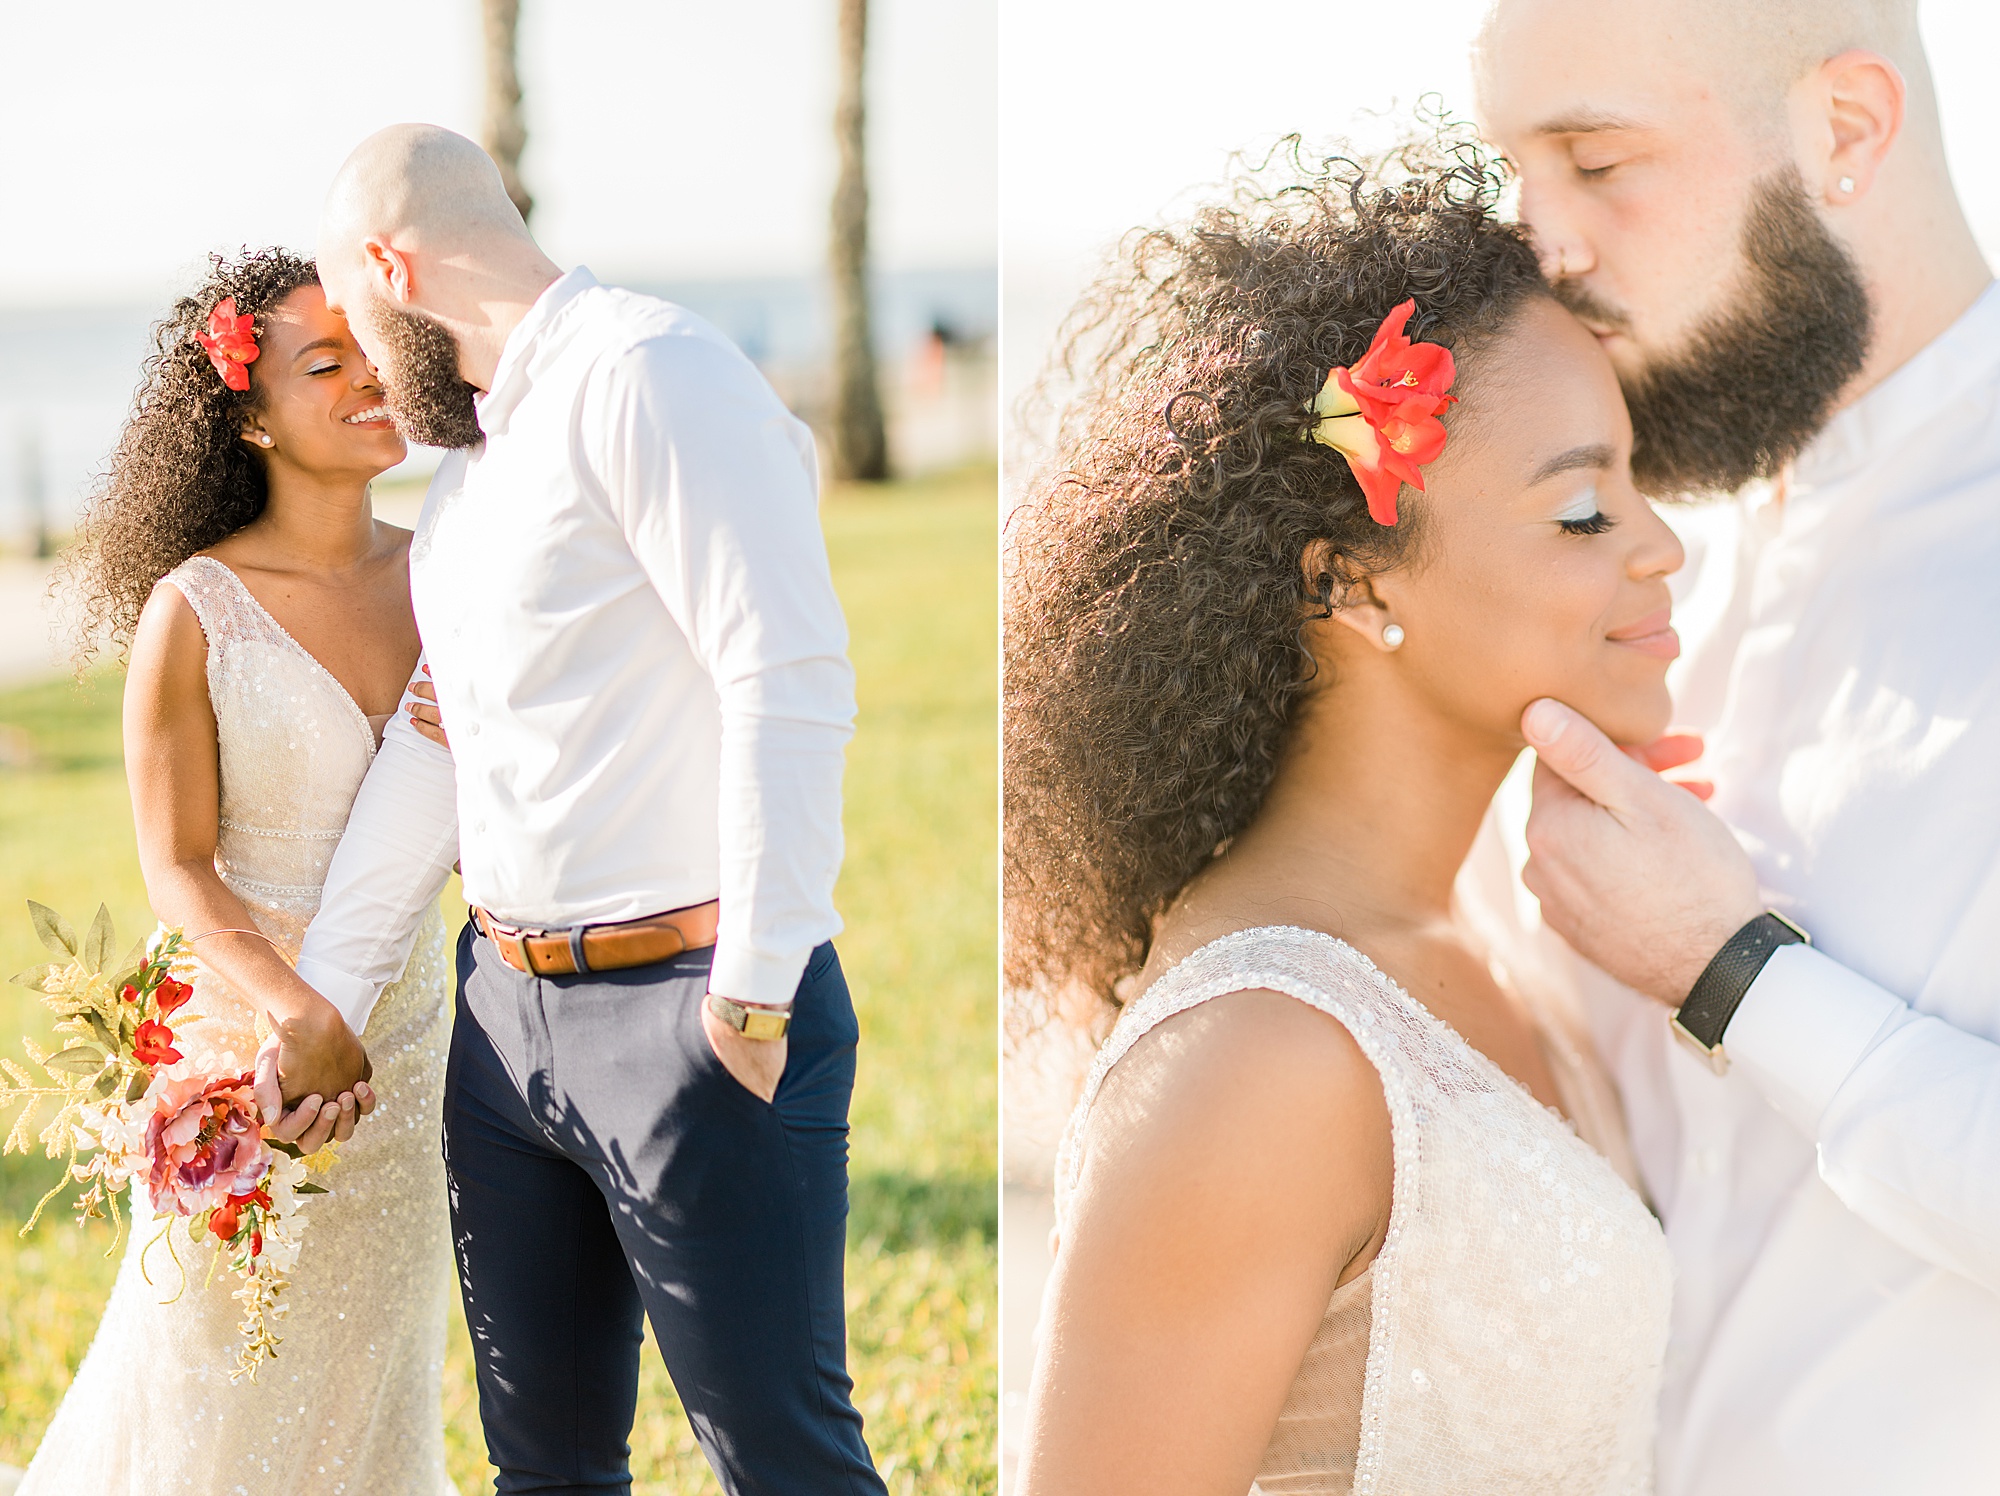 newlyweds kiss during tropical wedding in Florida